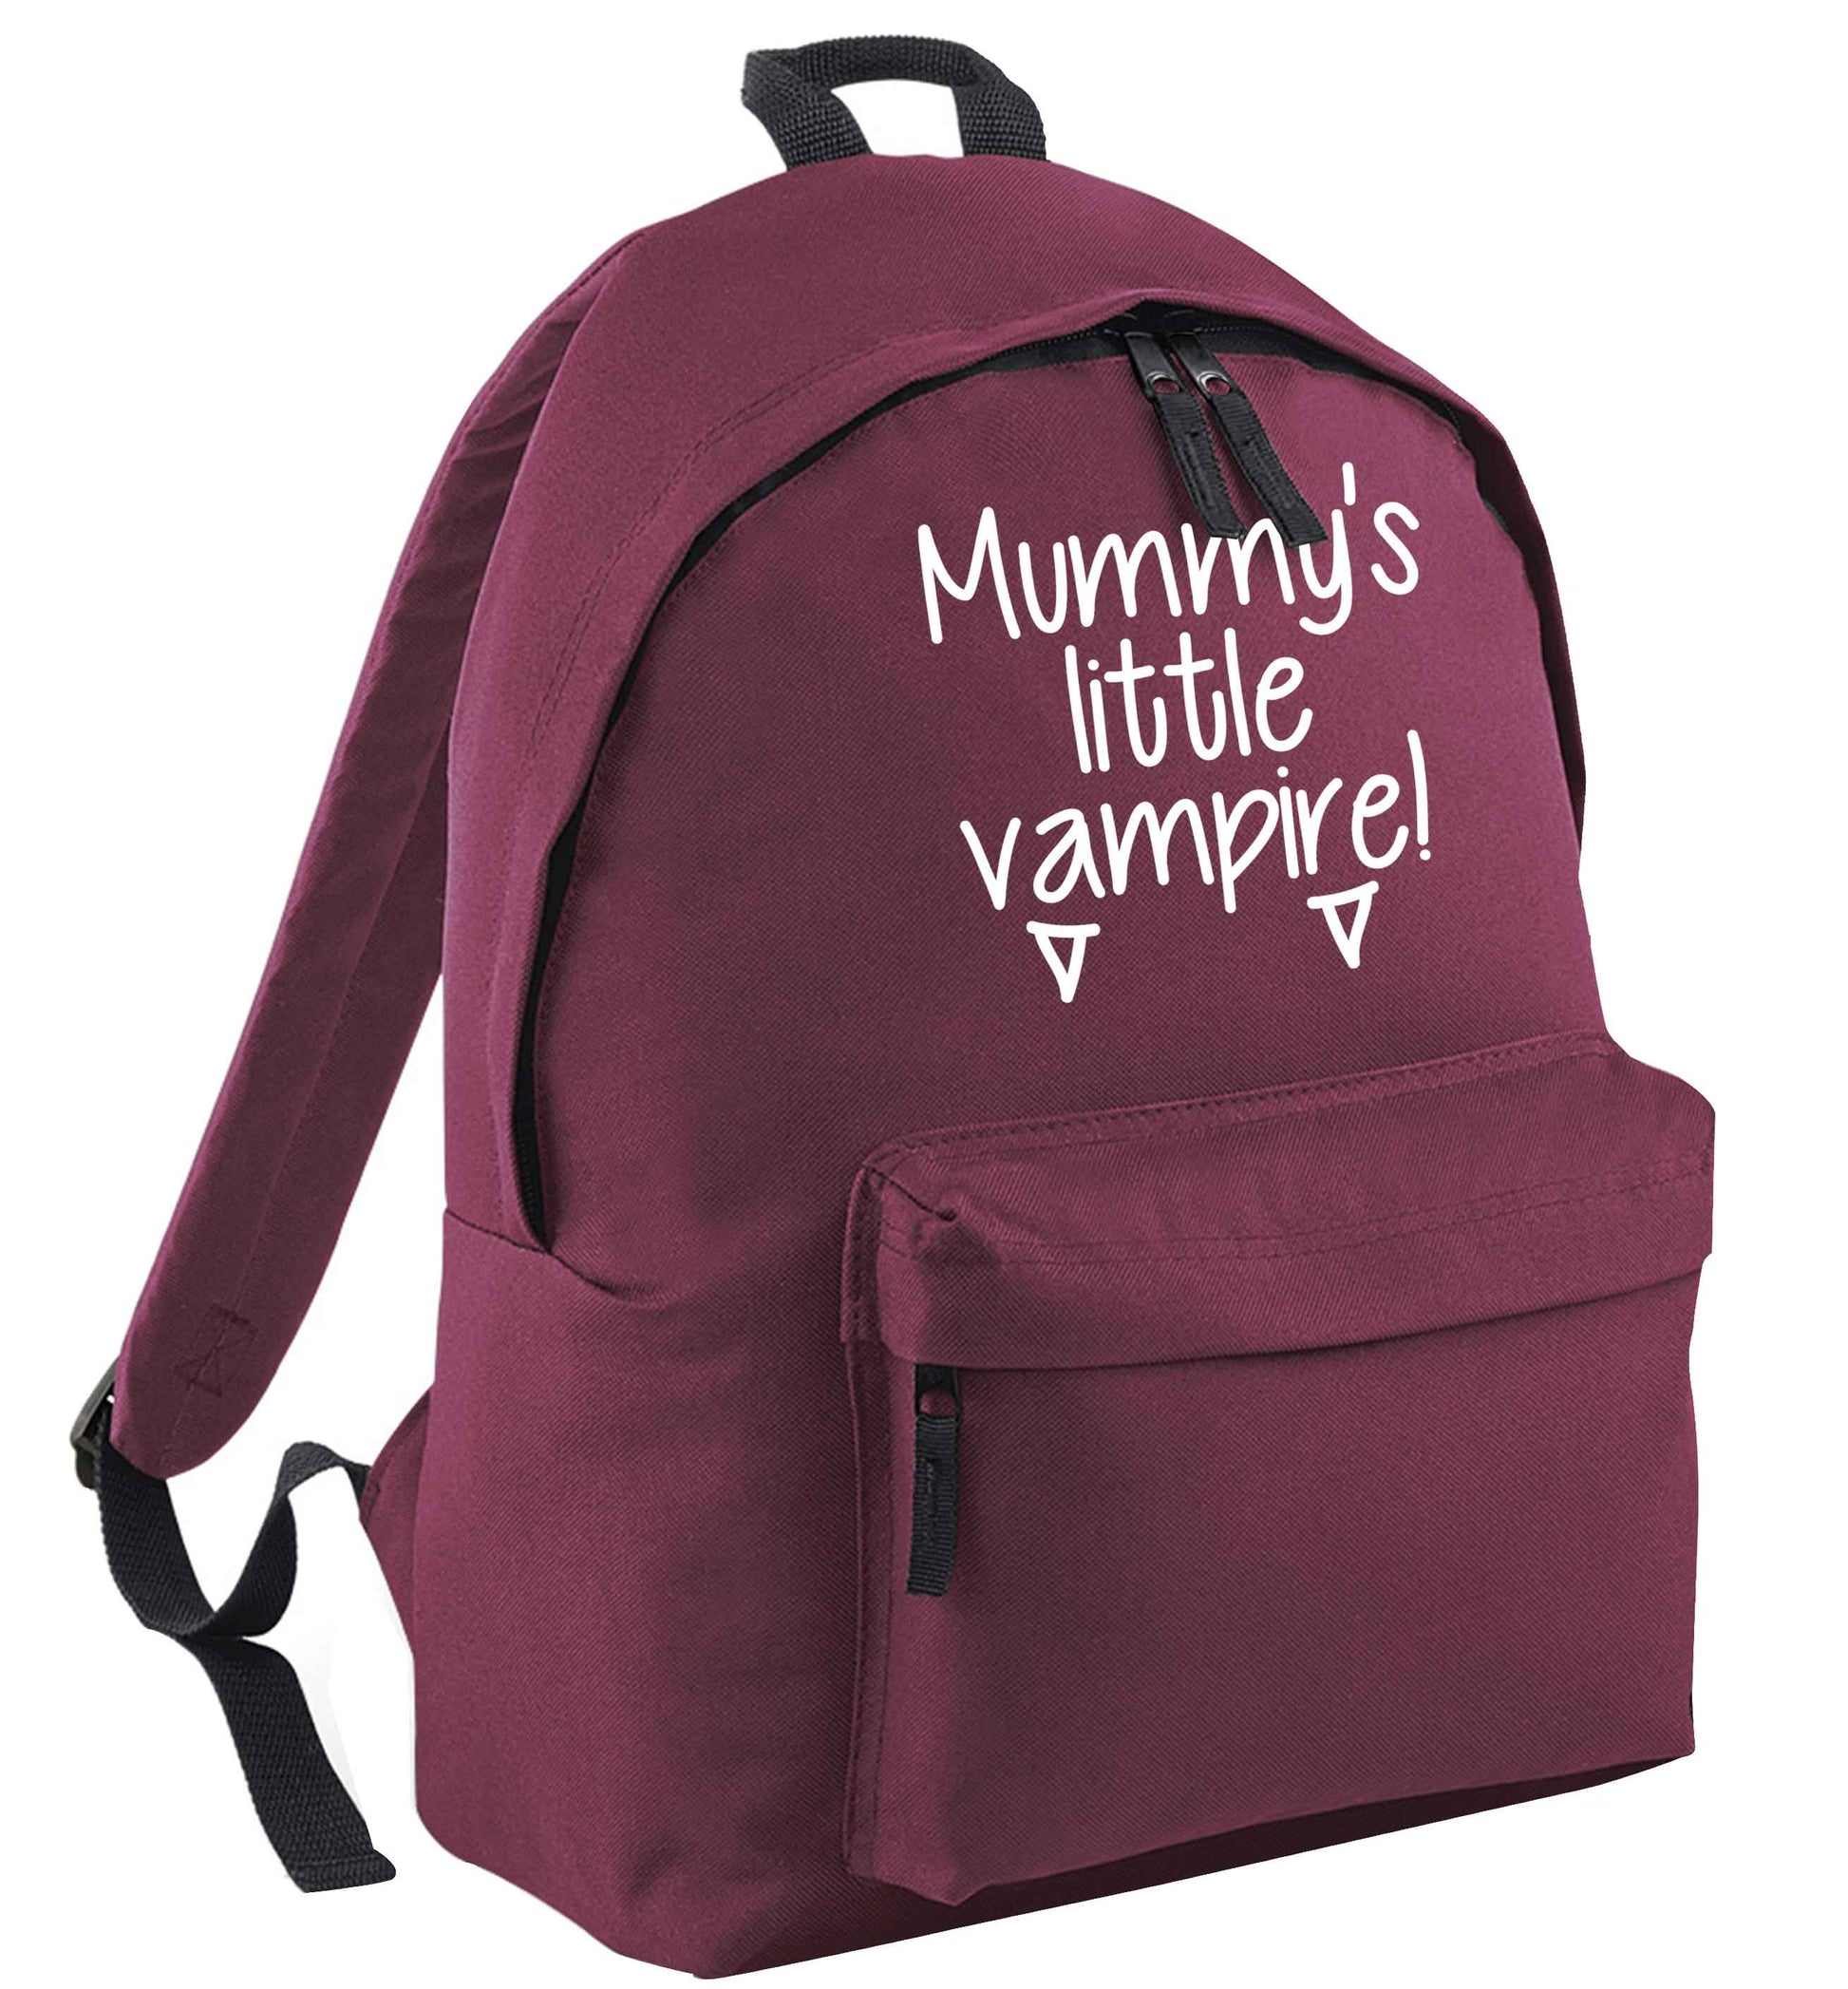 Mummy's little vampire maroon adults backpack